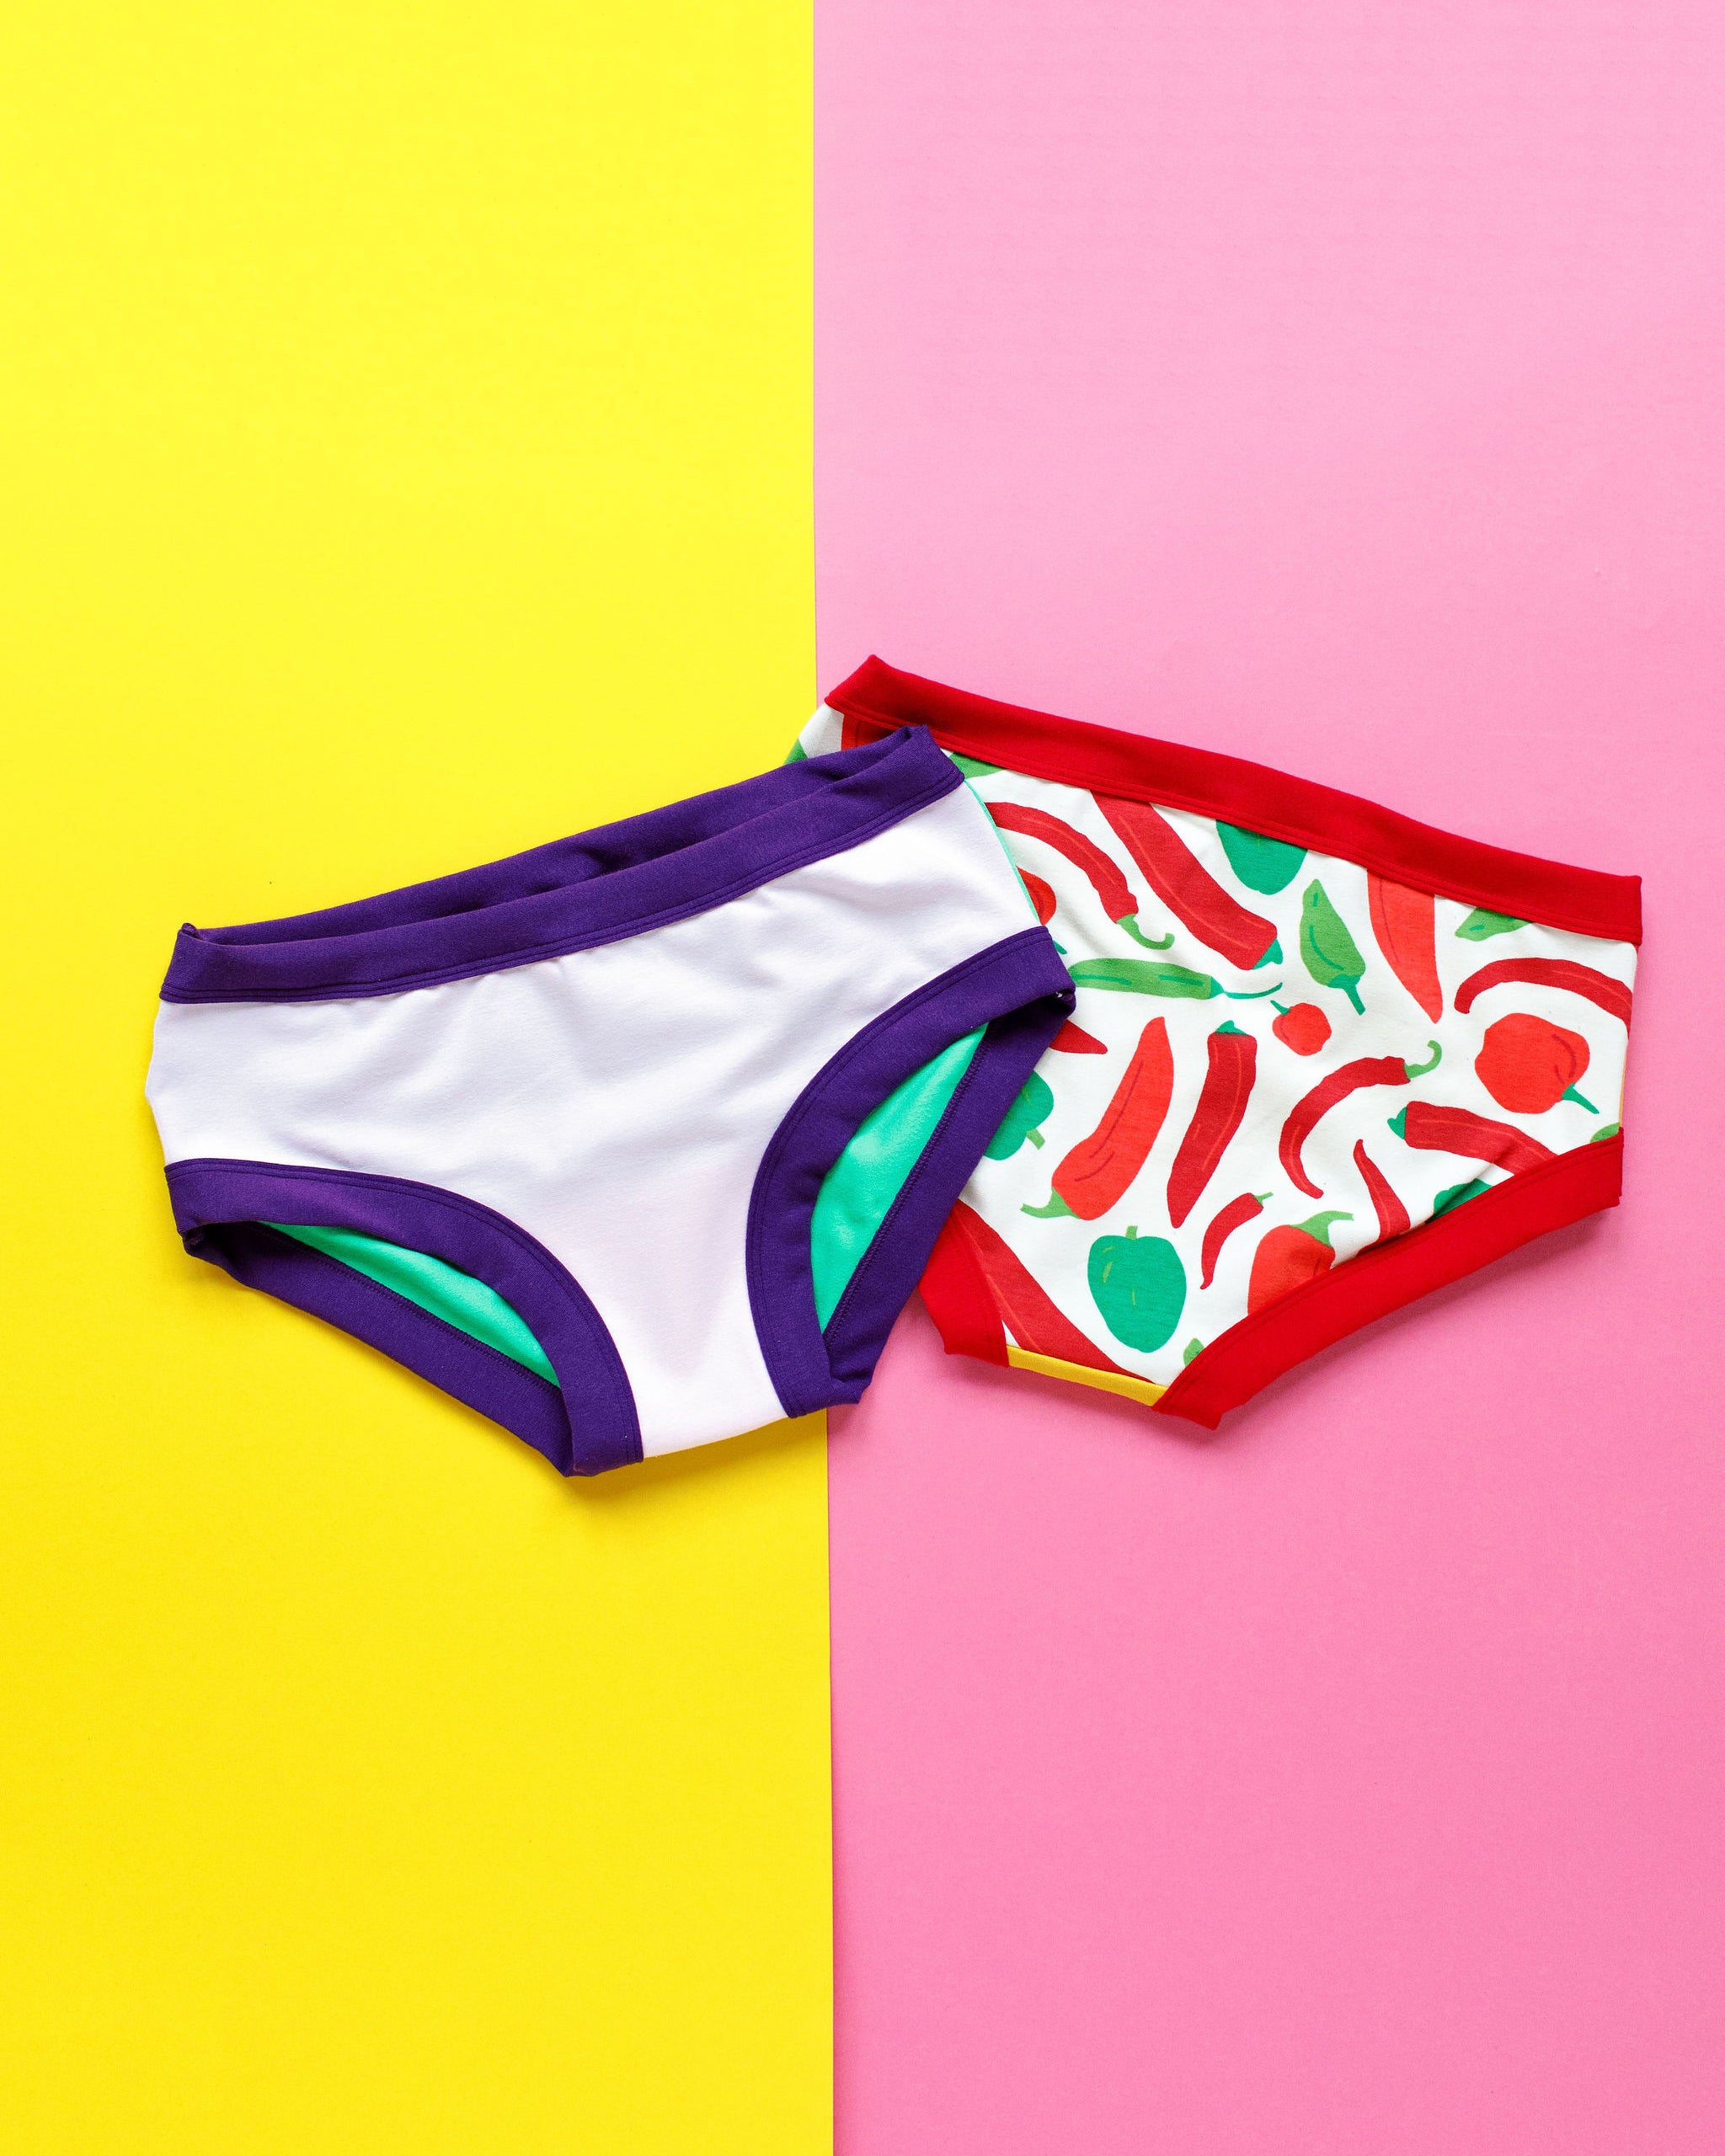 Flat lay of Thunderpants Hipster style underwear - combination of different solids and prints.